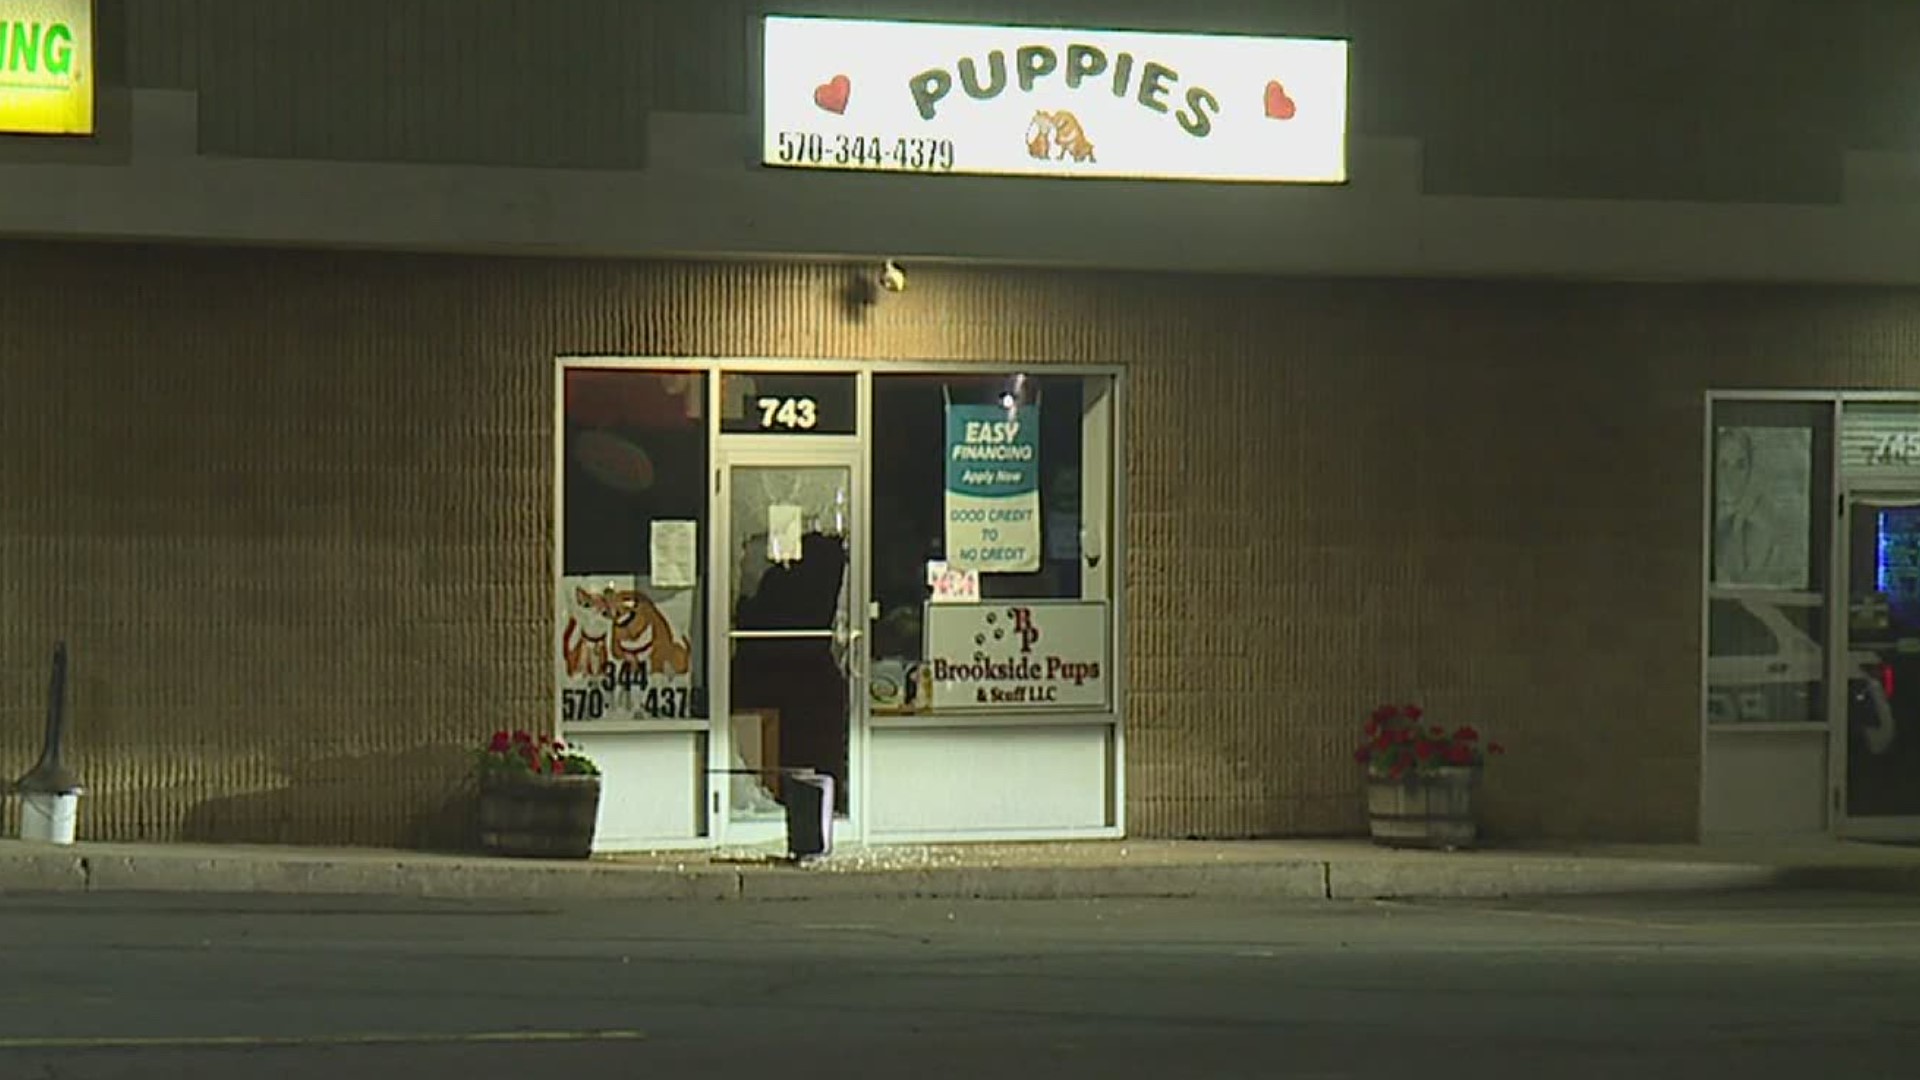 A duo allegedly broke a window and stole the dogs from a business called Puppies on Oak Street.